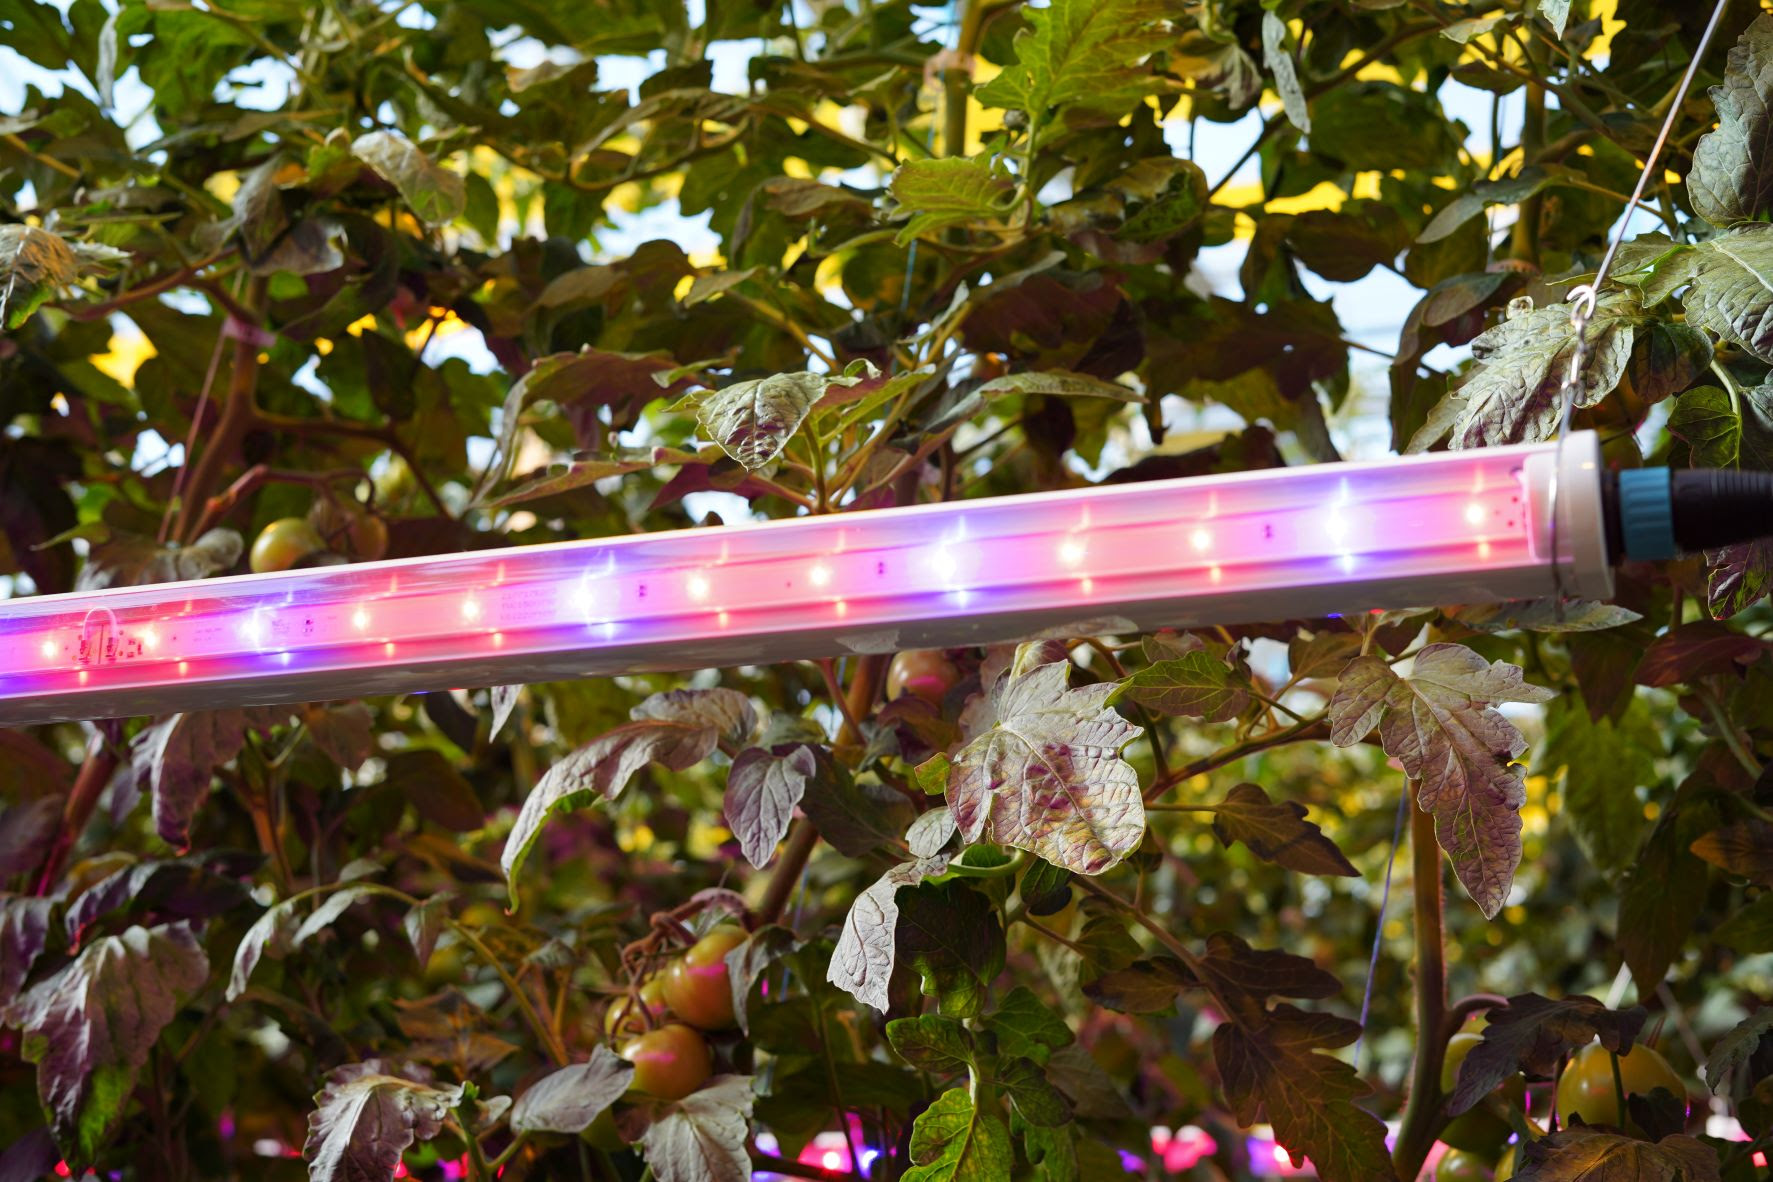 LED light bar positioned against a backdrop of tomato plants